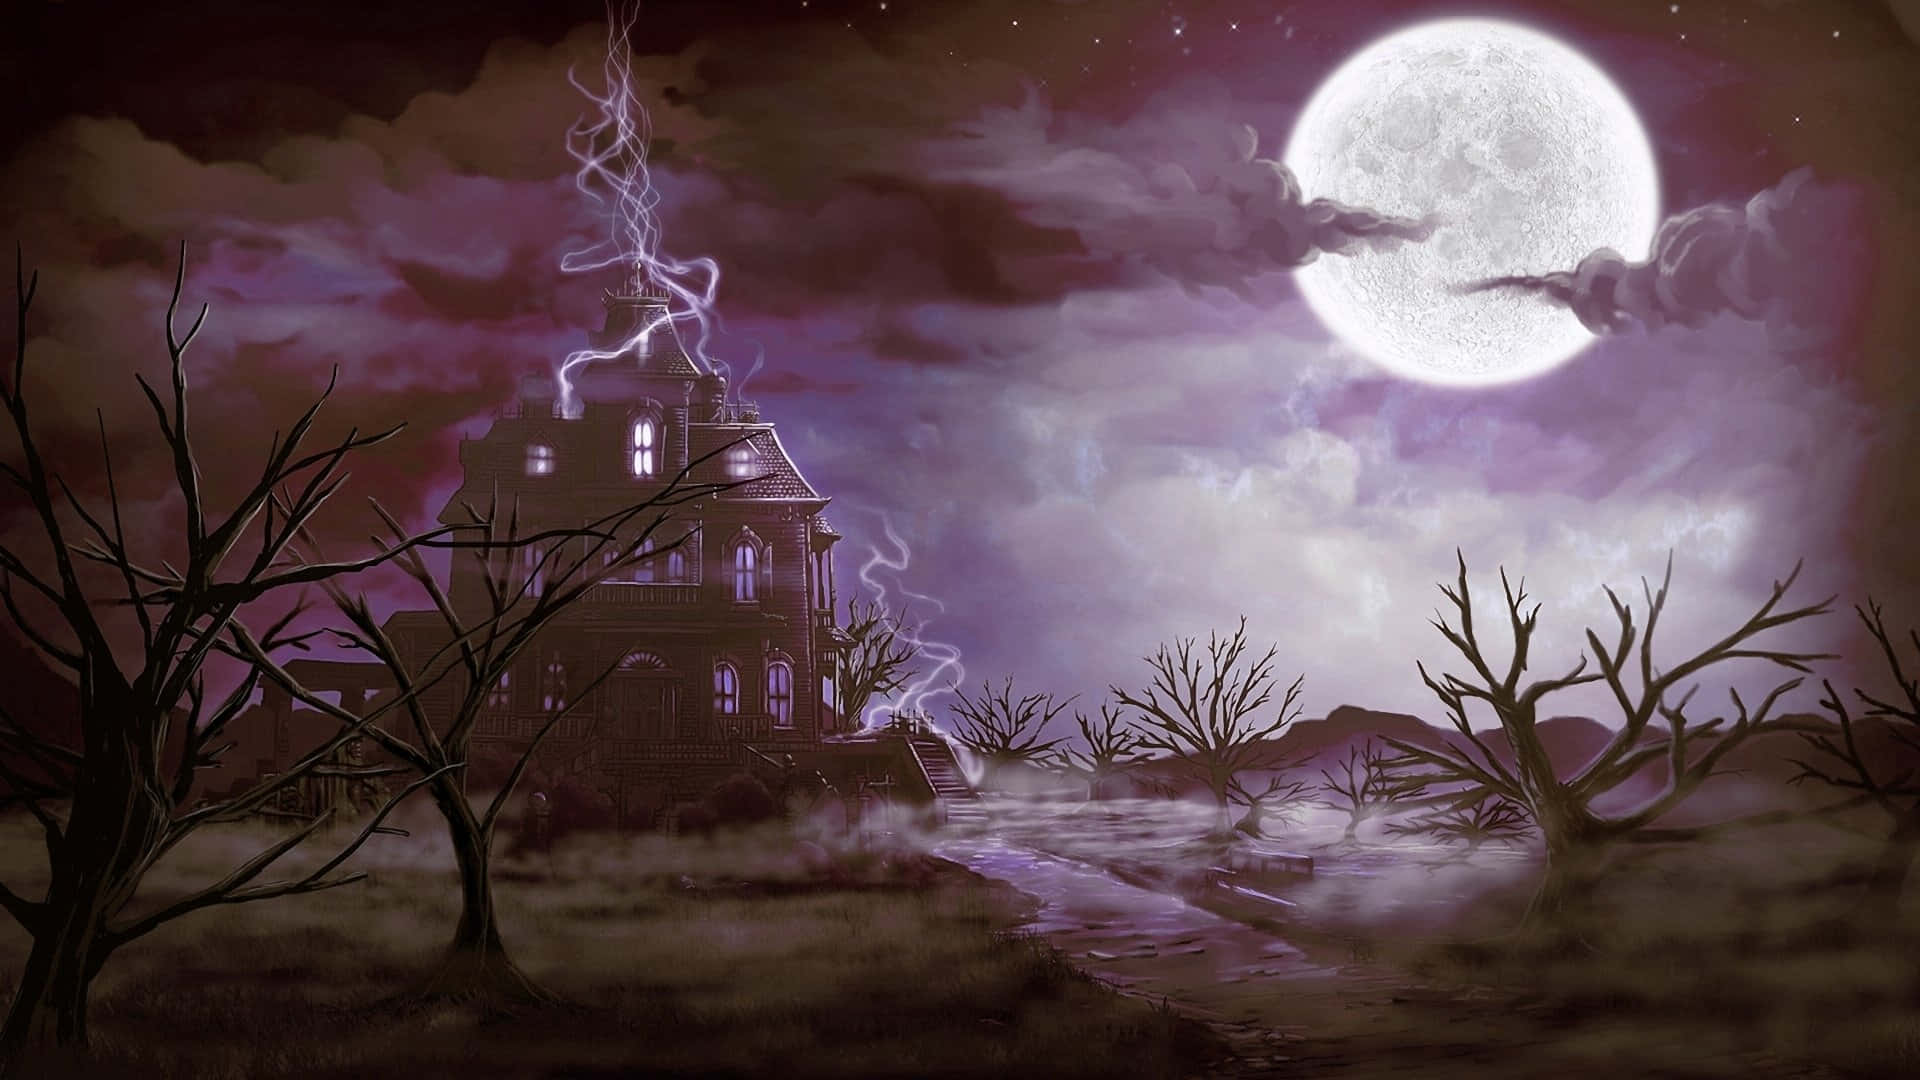 a painting of a haunted house with a full moon Wallpaper